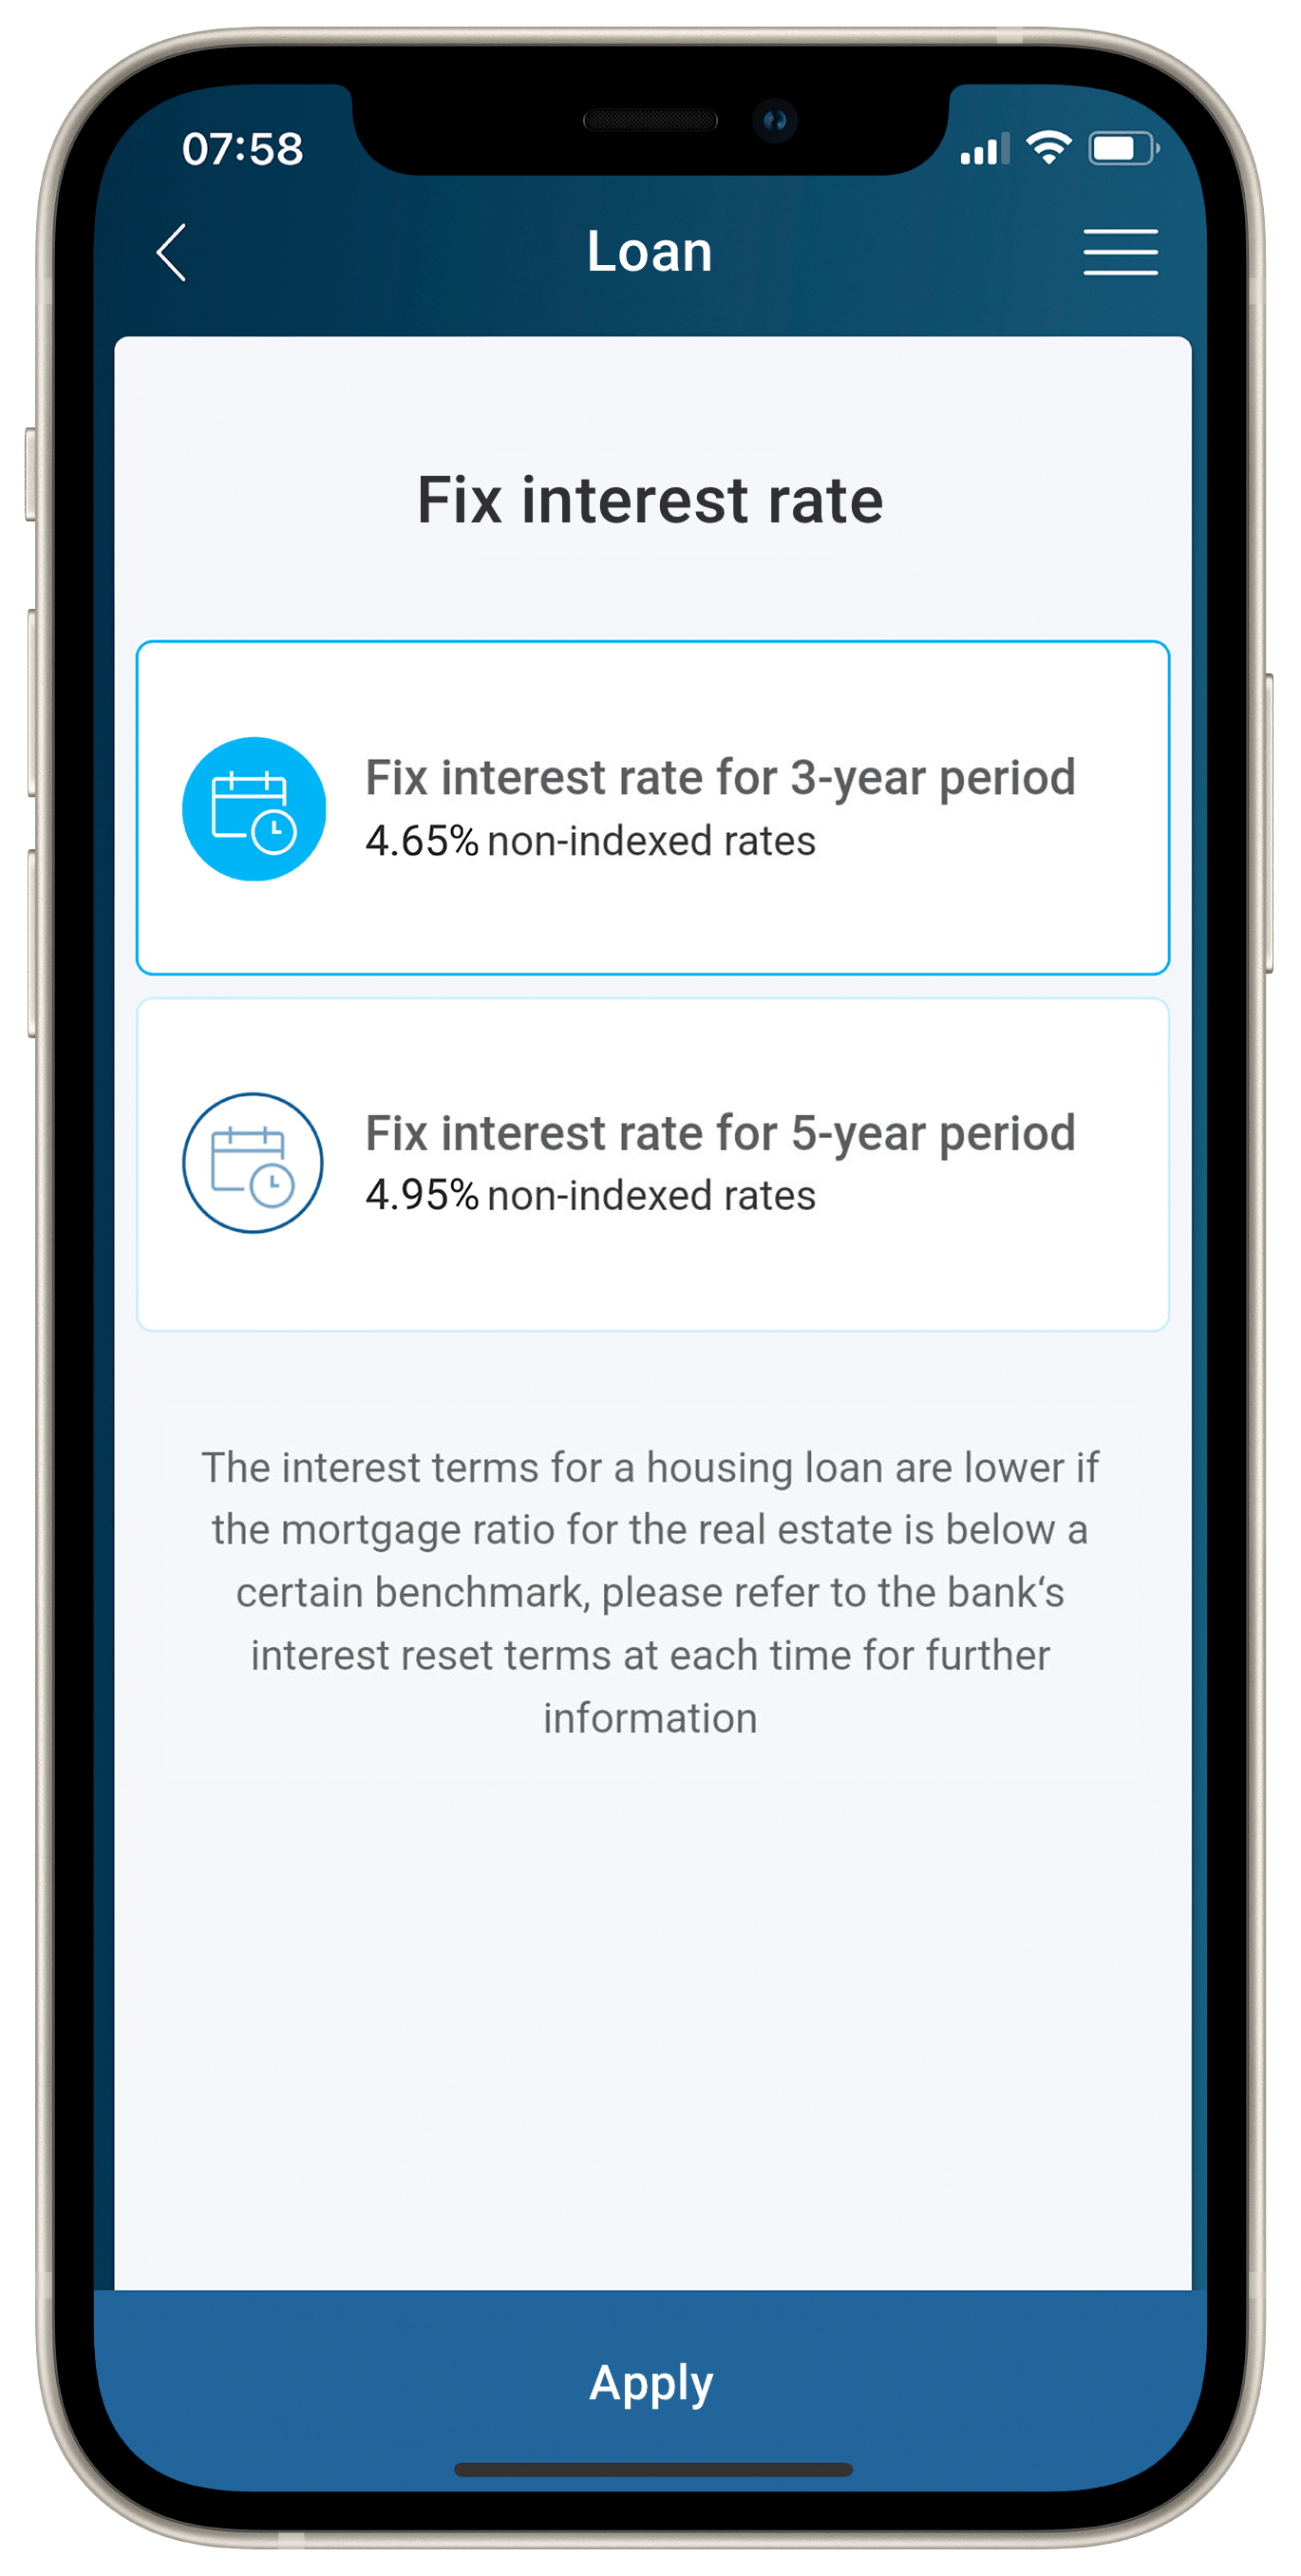 iPhone showing fix interest rate screen